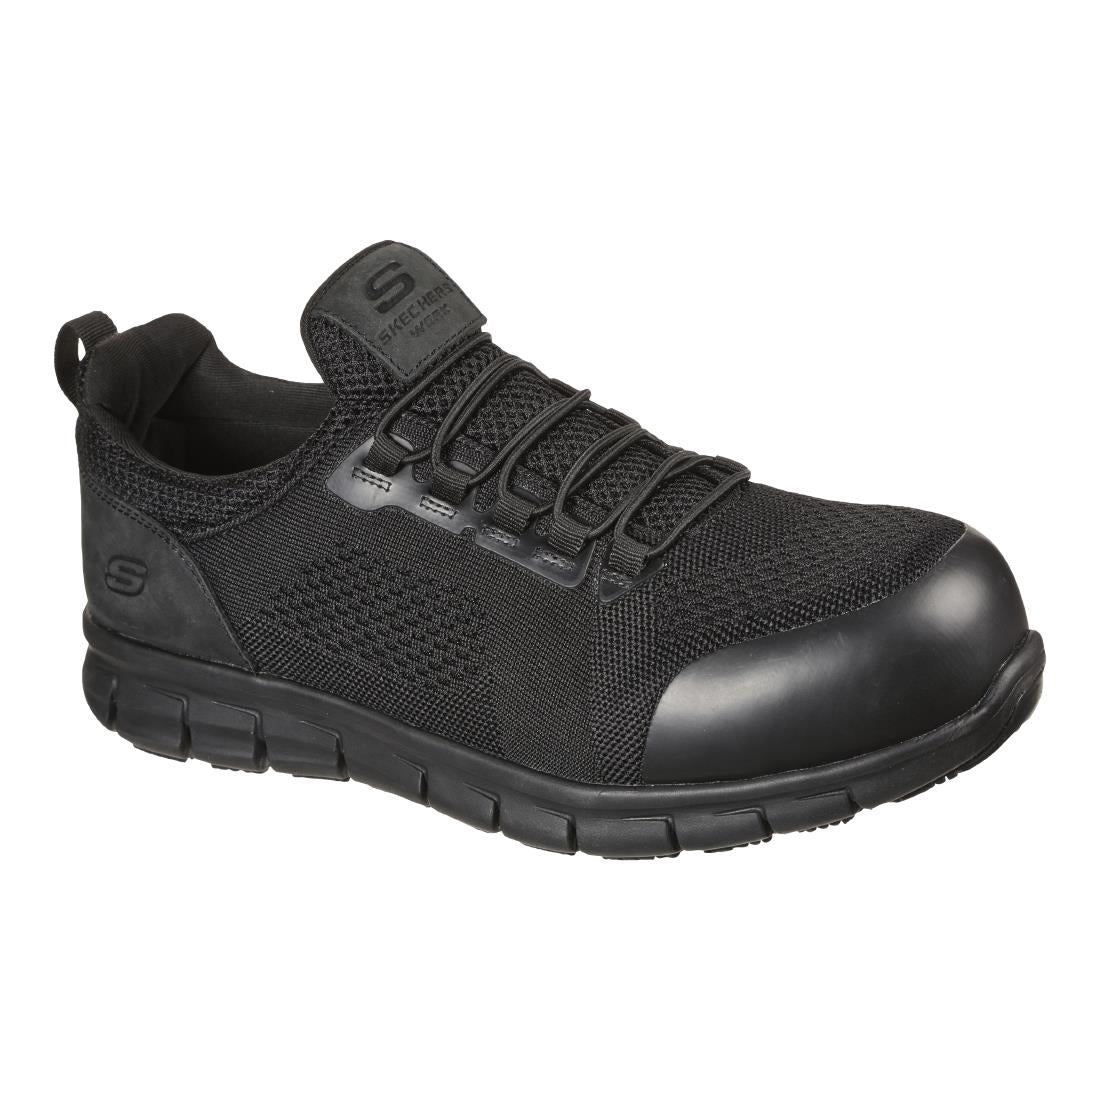 BB675-42 Skechers Safety Shoe with Steel Toe Cap Size 42 JD Catering Equipment Solutions Ltd